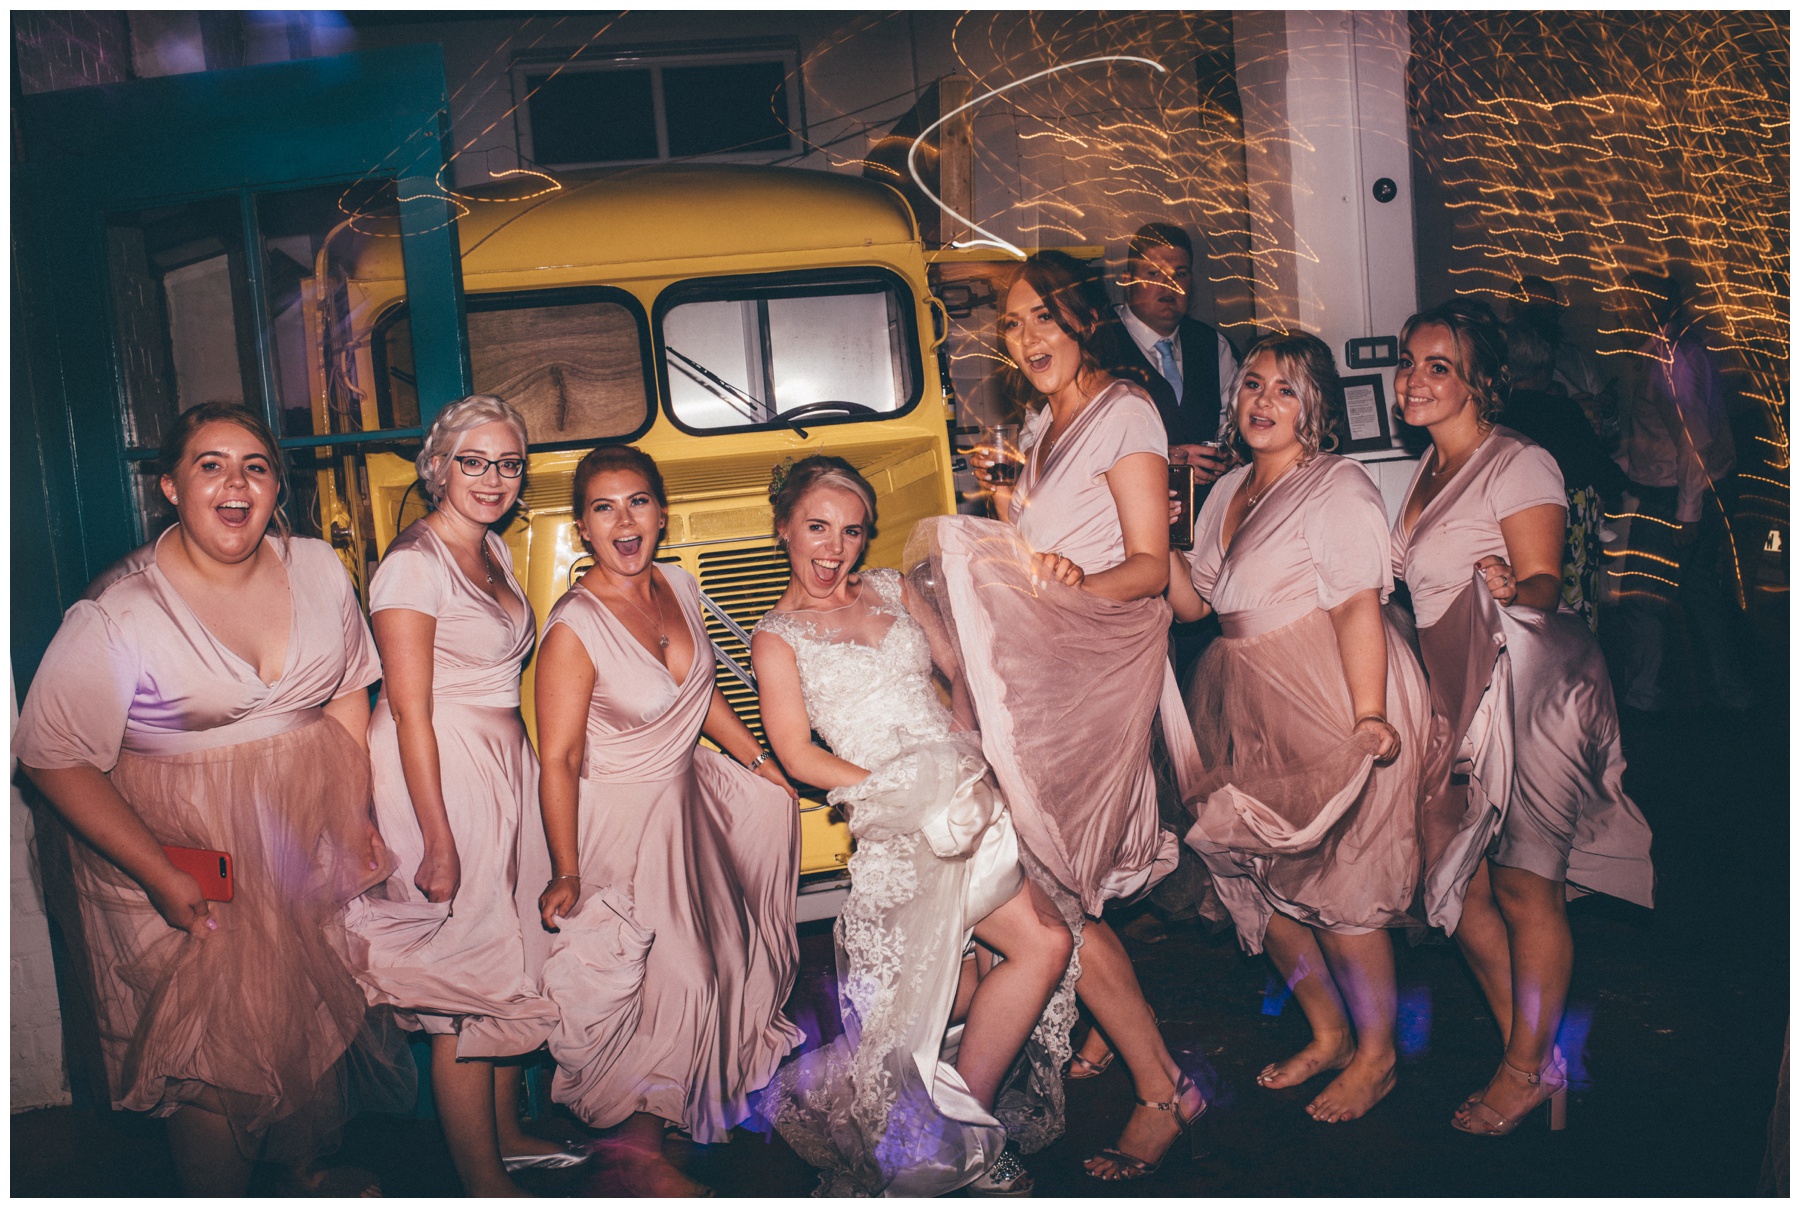 Bridesmaids dance with the bride at The Hide, a cool, Urban wedding venue in Sheffield.